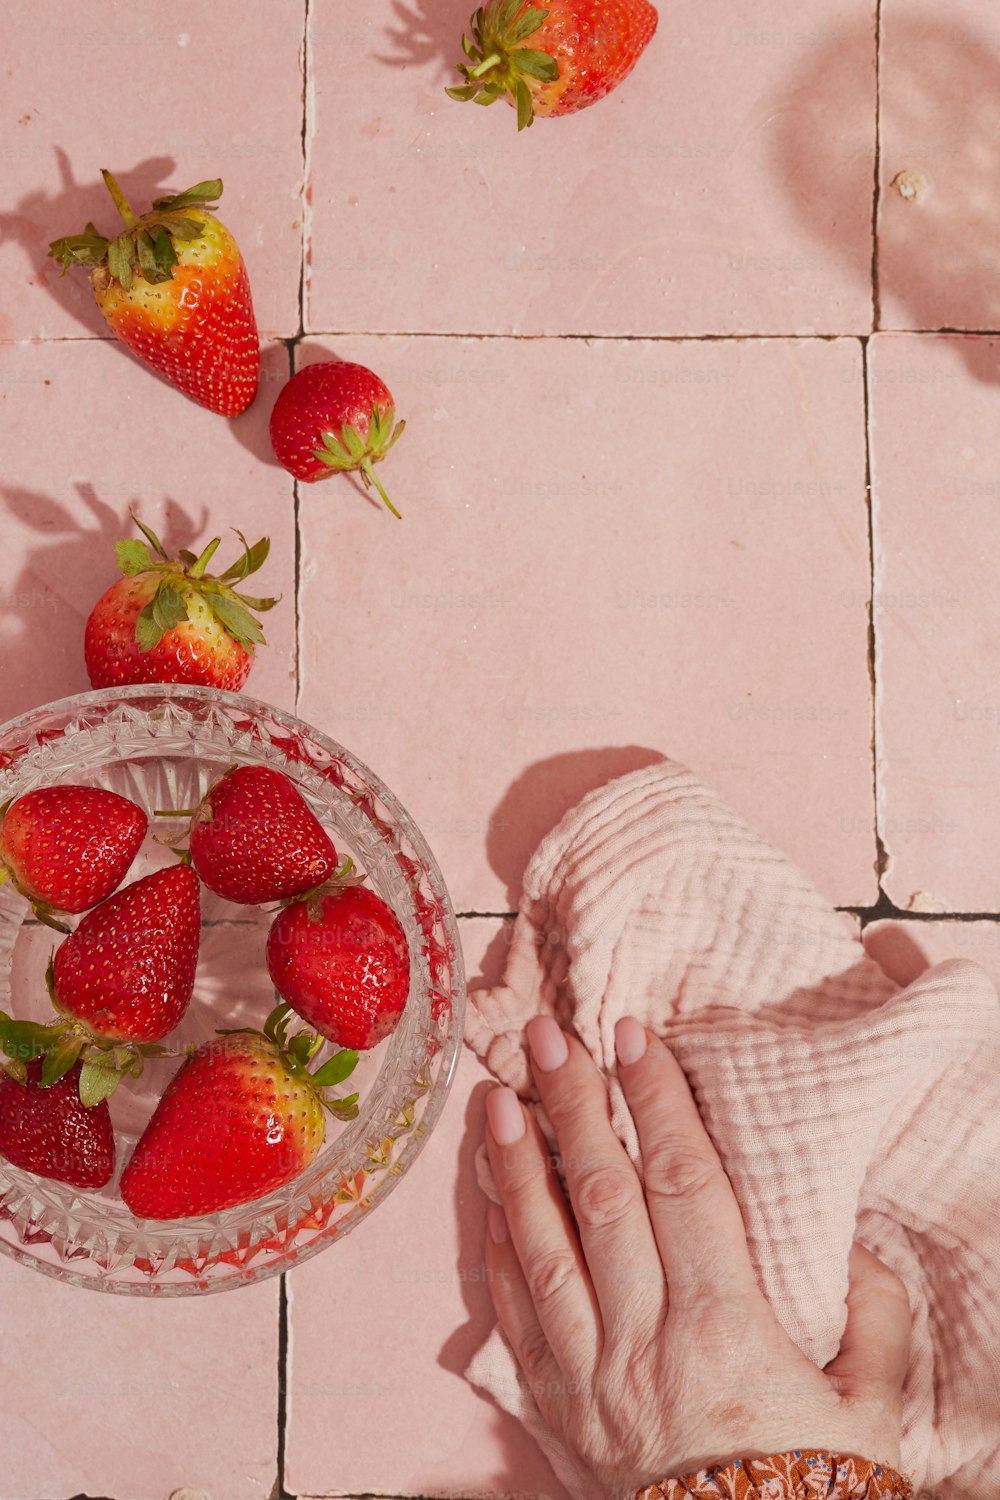 a bowl of strawberries and a bowl of strawberries on a pink tile floor